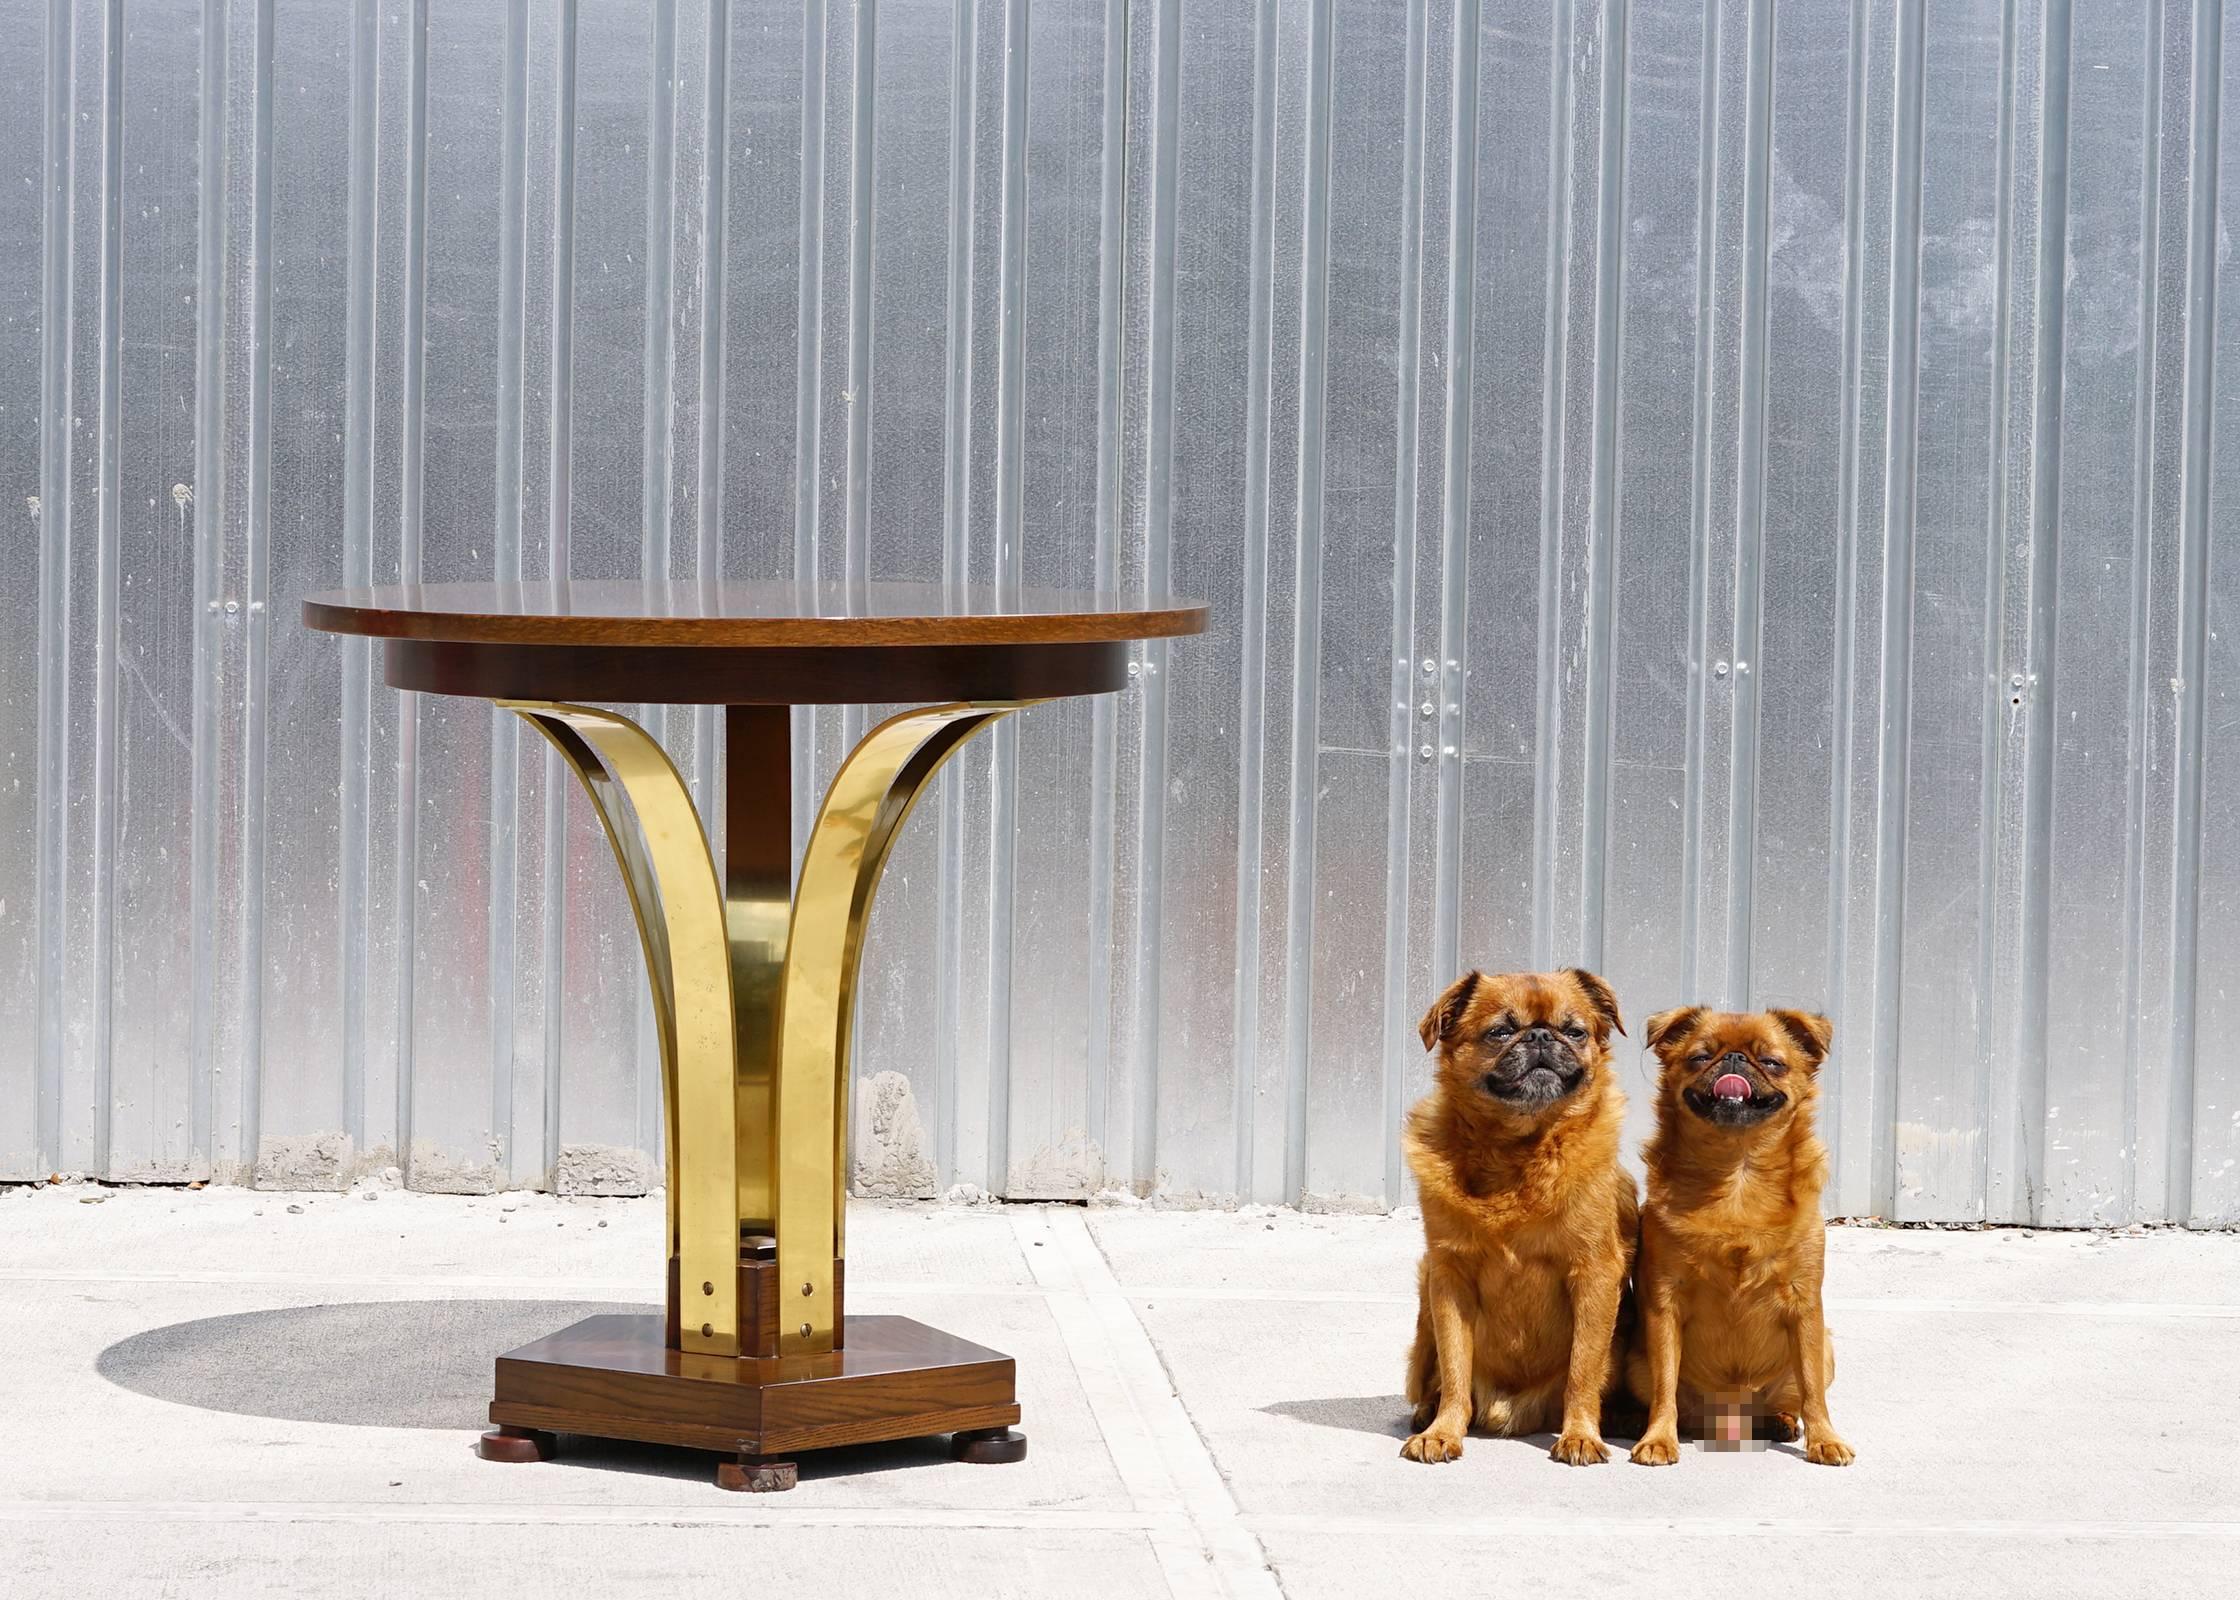 This Roger Sprunger for Dunbar Tulip table features brass-plated steel supports and beautifully figured wood top and base. Versatile and multifunctional as a side table, occasional table, or as a tea table for two. All original with lovely natural